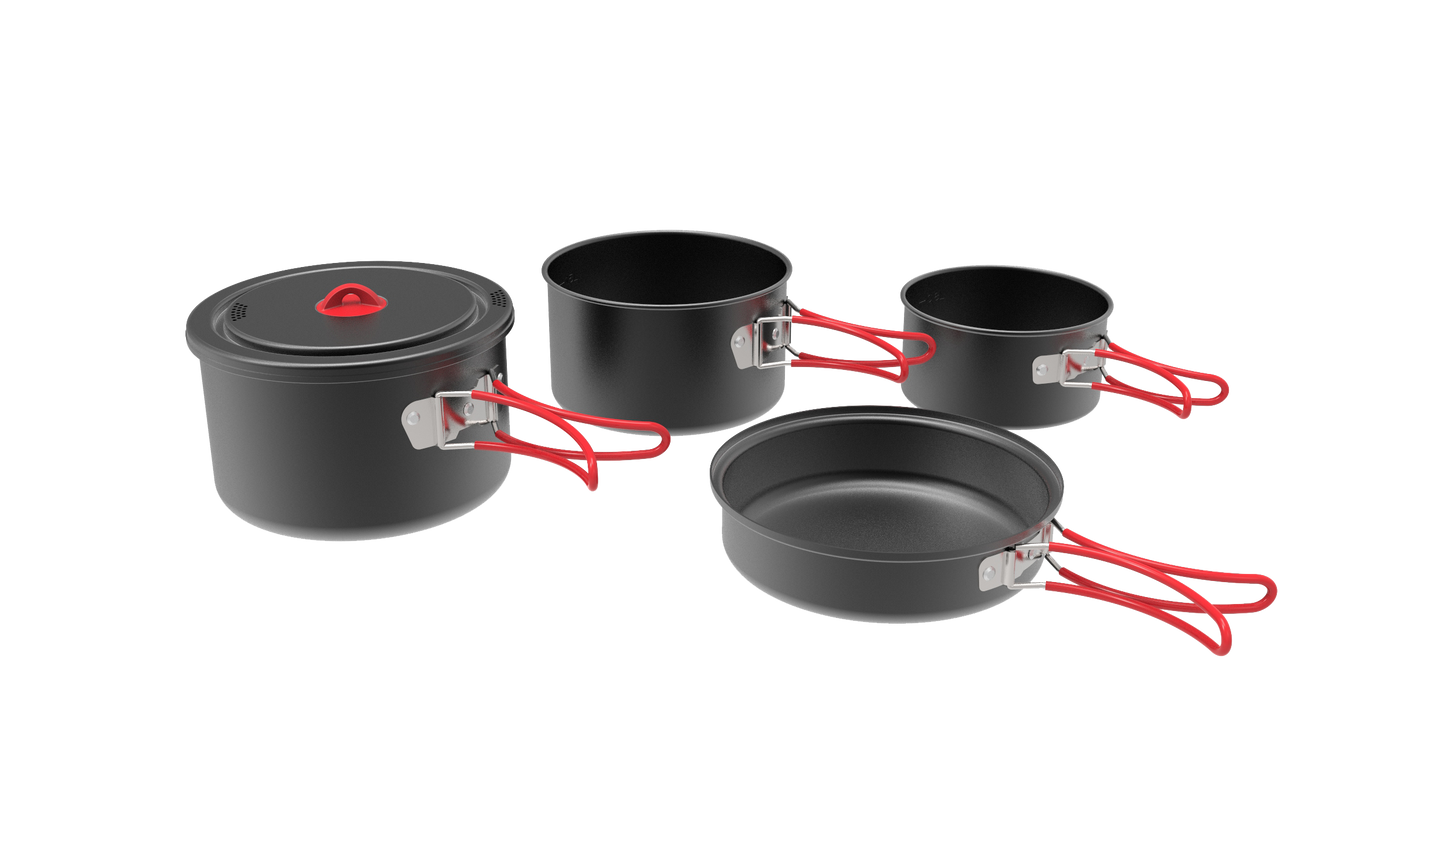 Hard Anodized Family Cook Set